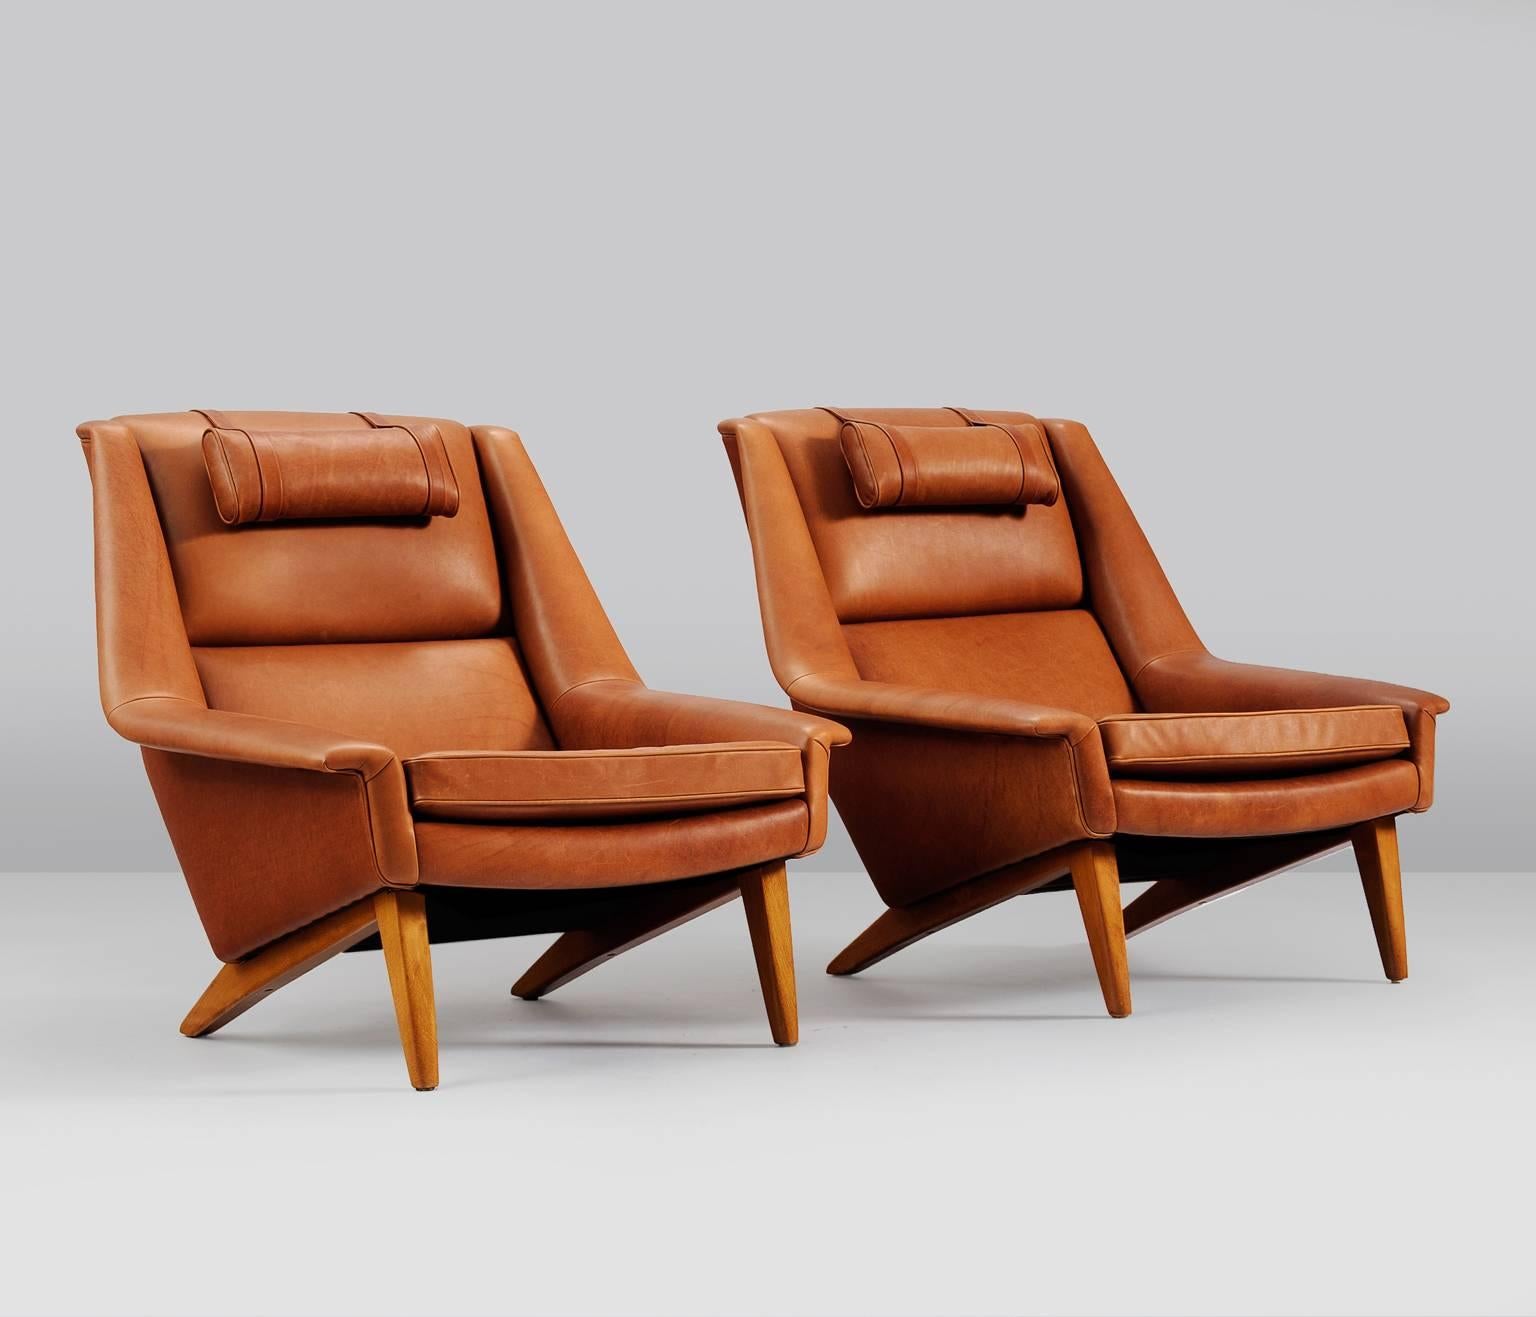 Package Deal for M - #4 Danish Reupholstered Lounge Chairs in Cognac Leather. Listed as 1 item, please note it is a set of 4.
